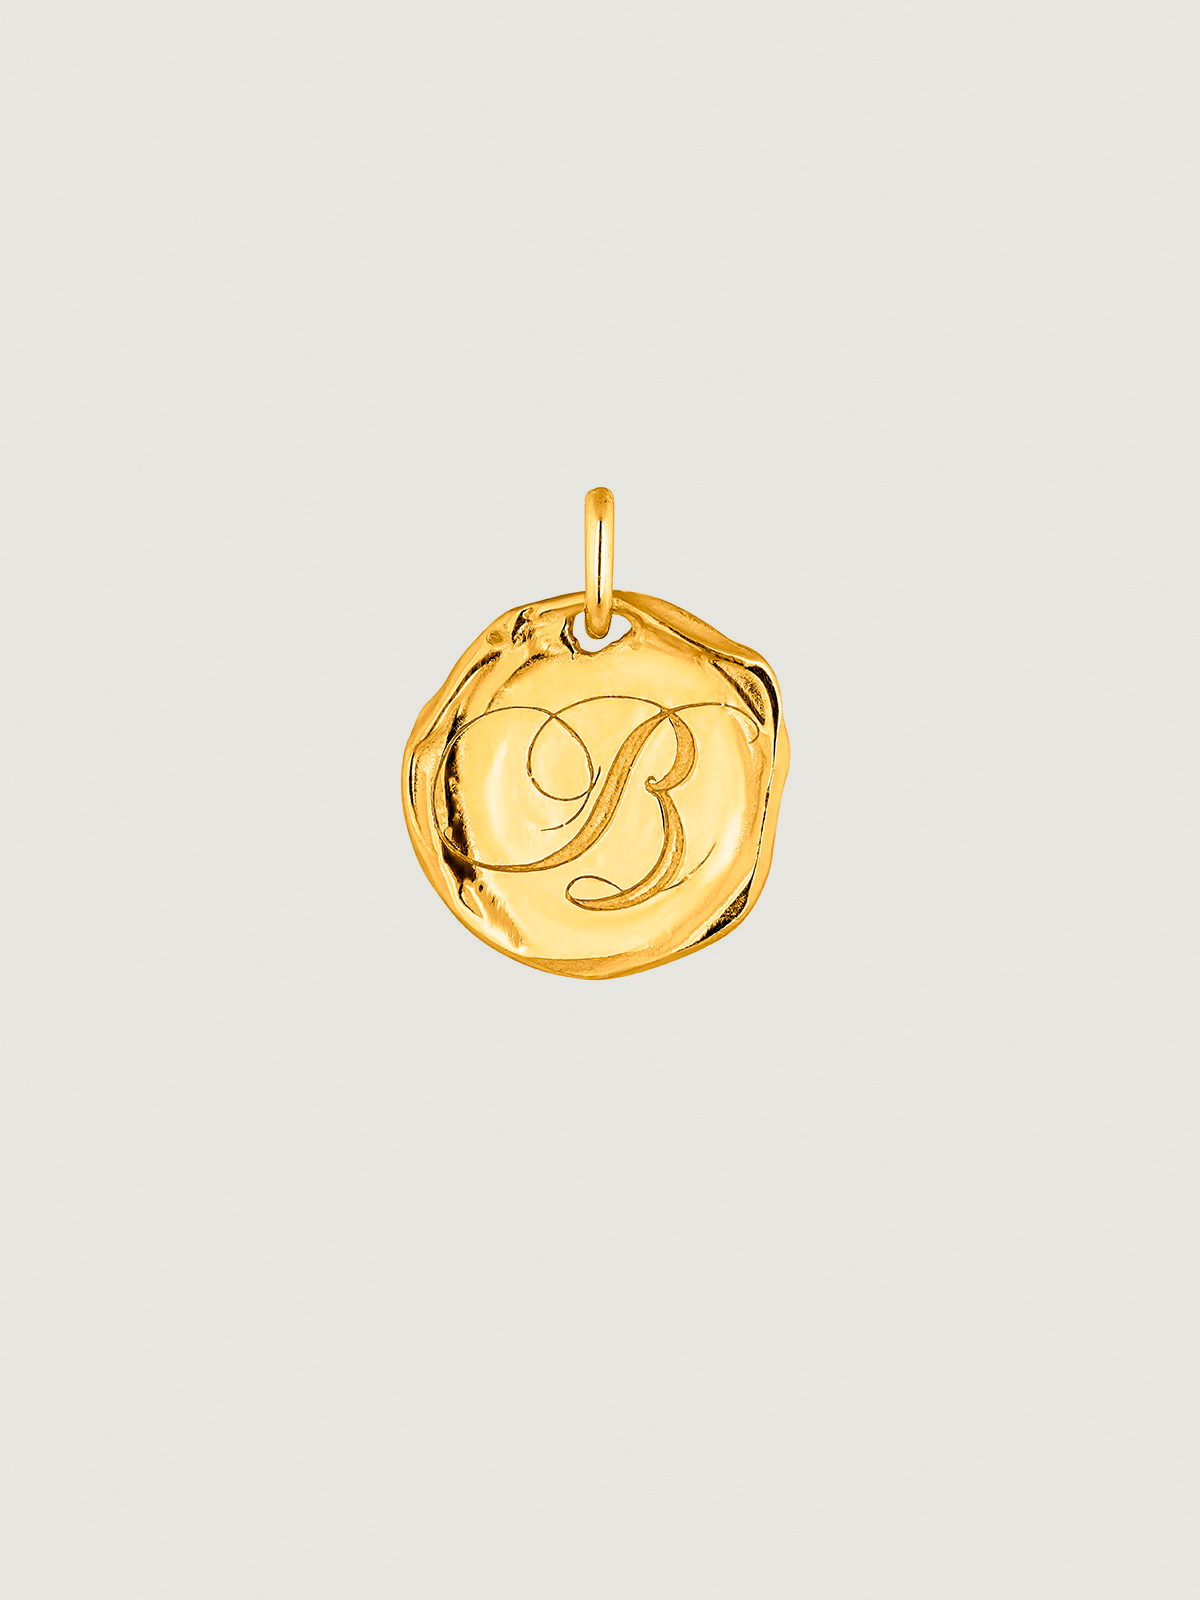 Handcrafted silver 925 charm, bathed in 18k yellow gold with initial B.